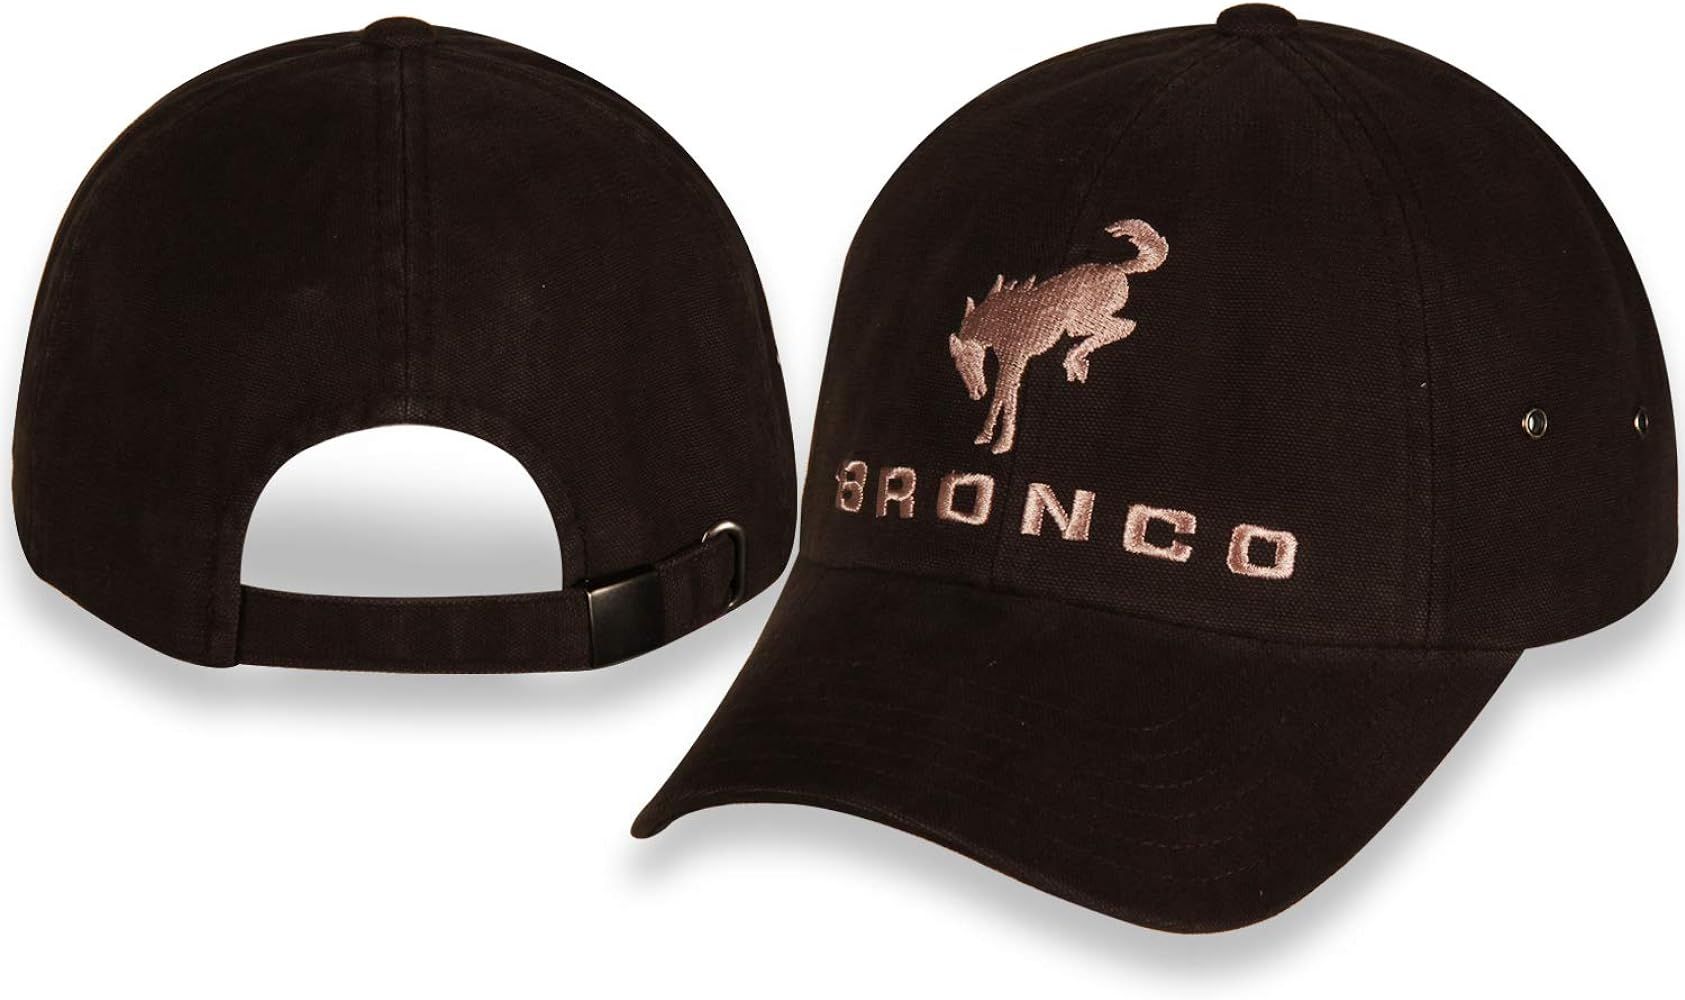 New Ford Bronco Dark Brown Unstructured Washed Canvas Cap/Hat with Adjustable Closure | Amazon (US)